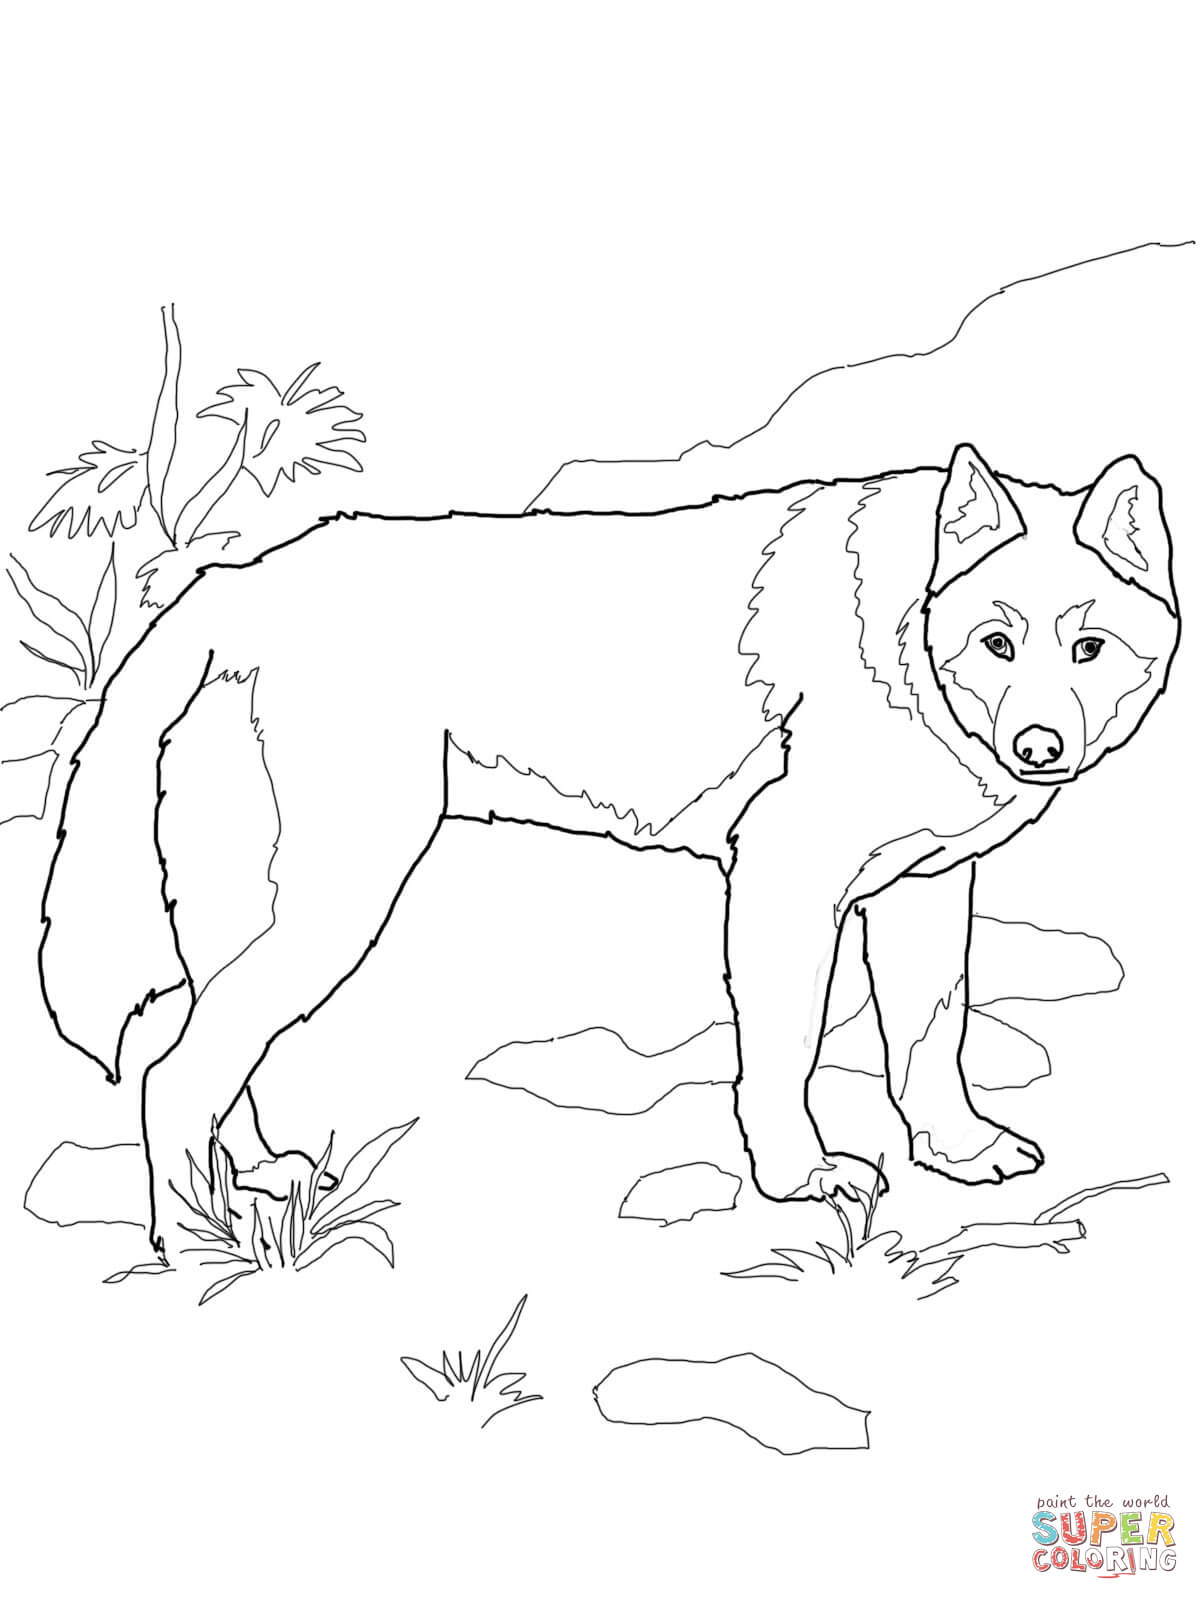 Dingo wild dog coloring page free printable coloring pages